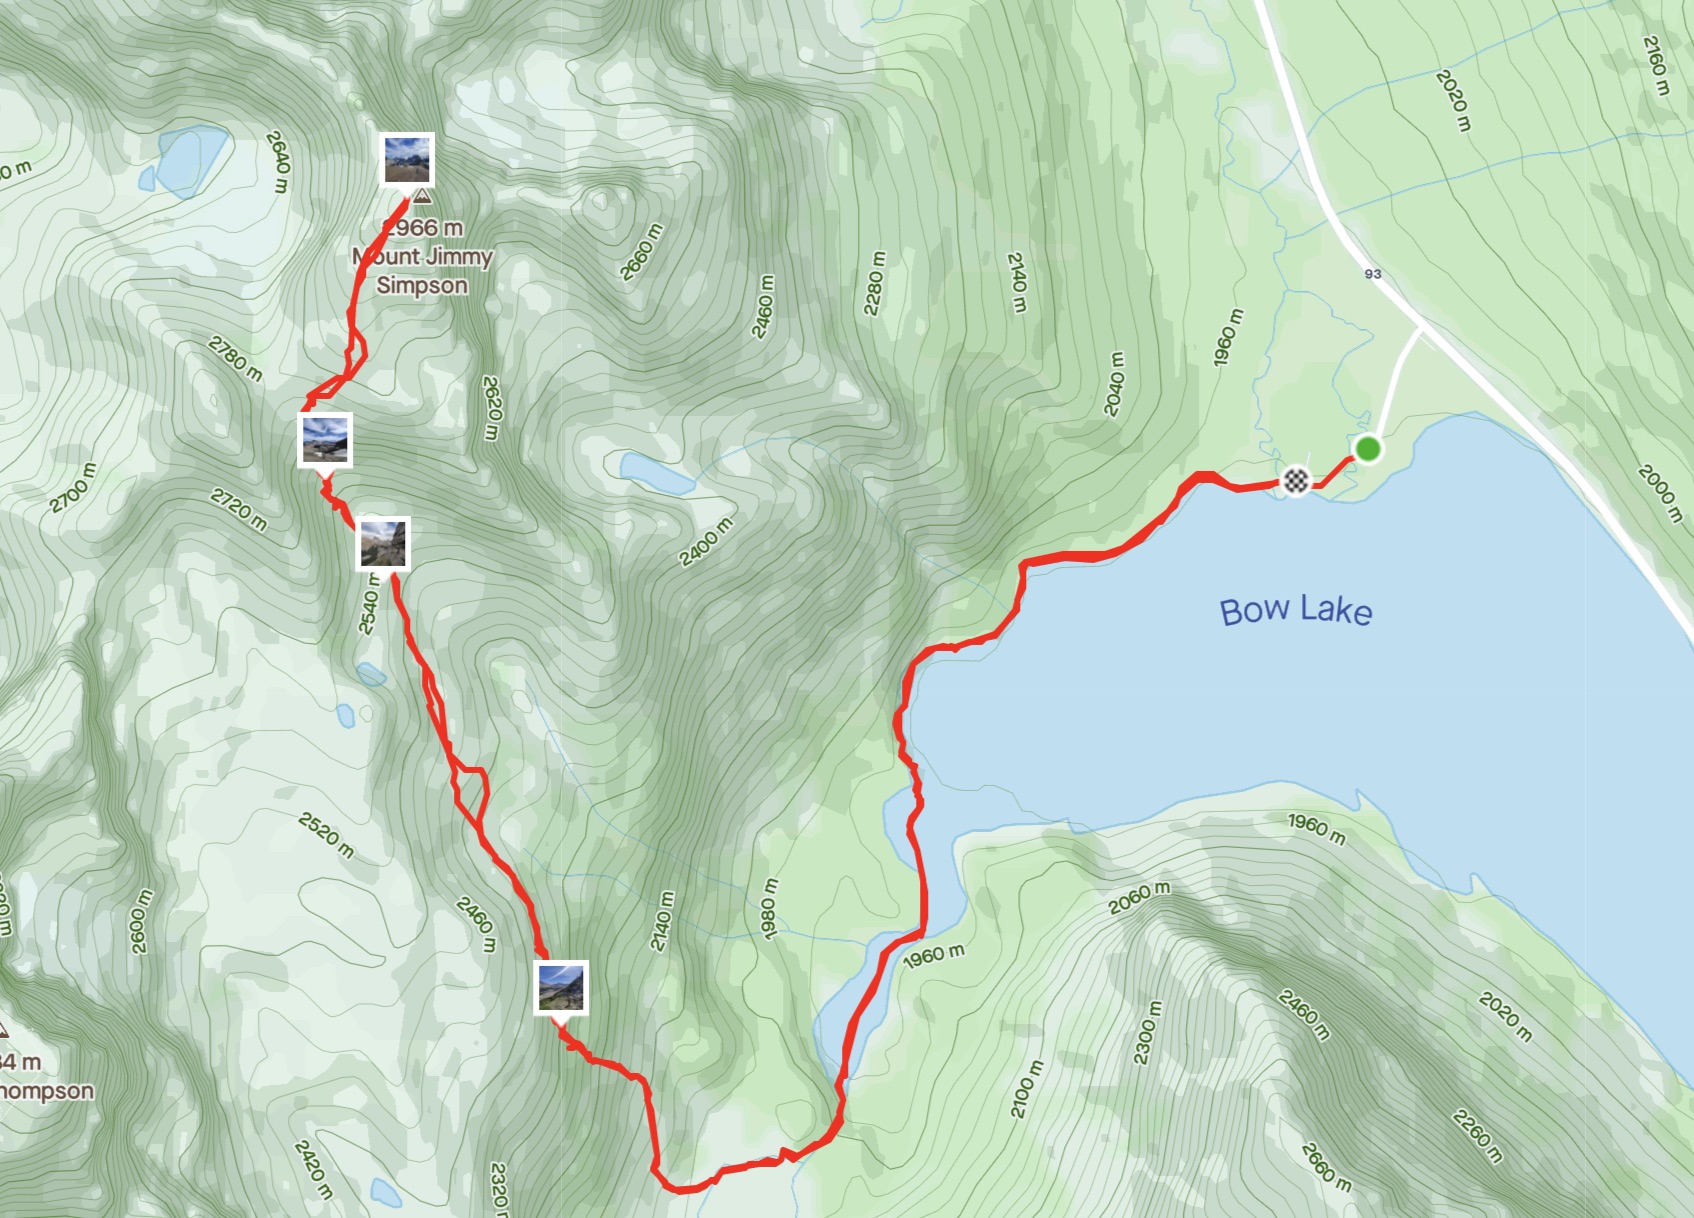 Mount Jimmy Simpson GPX Route